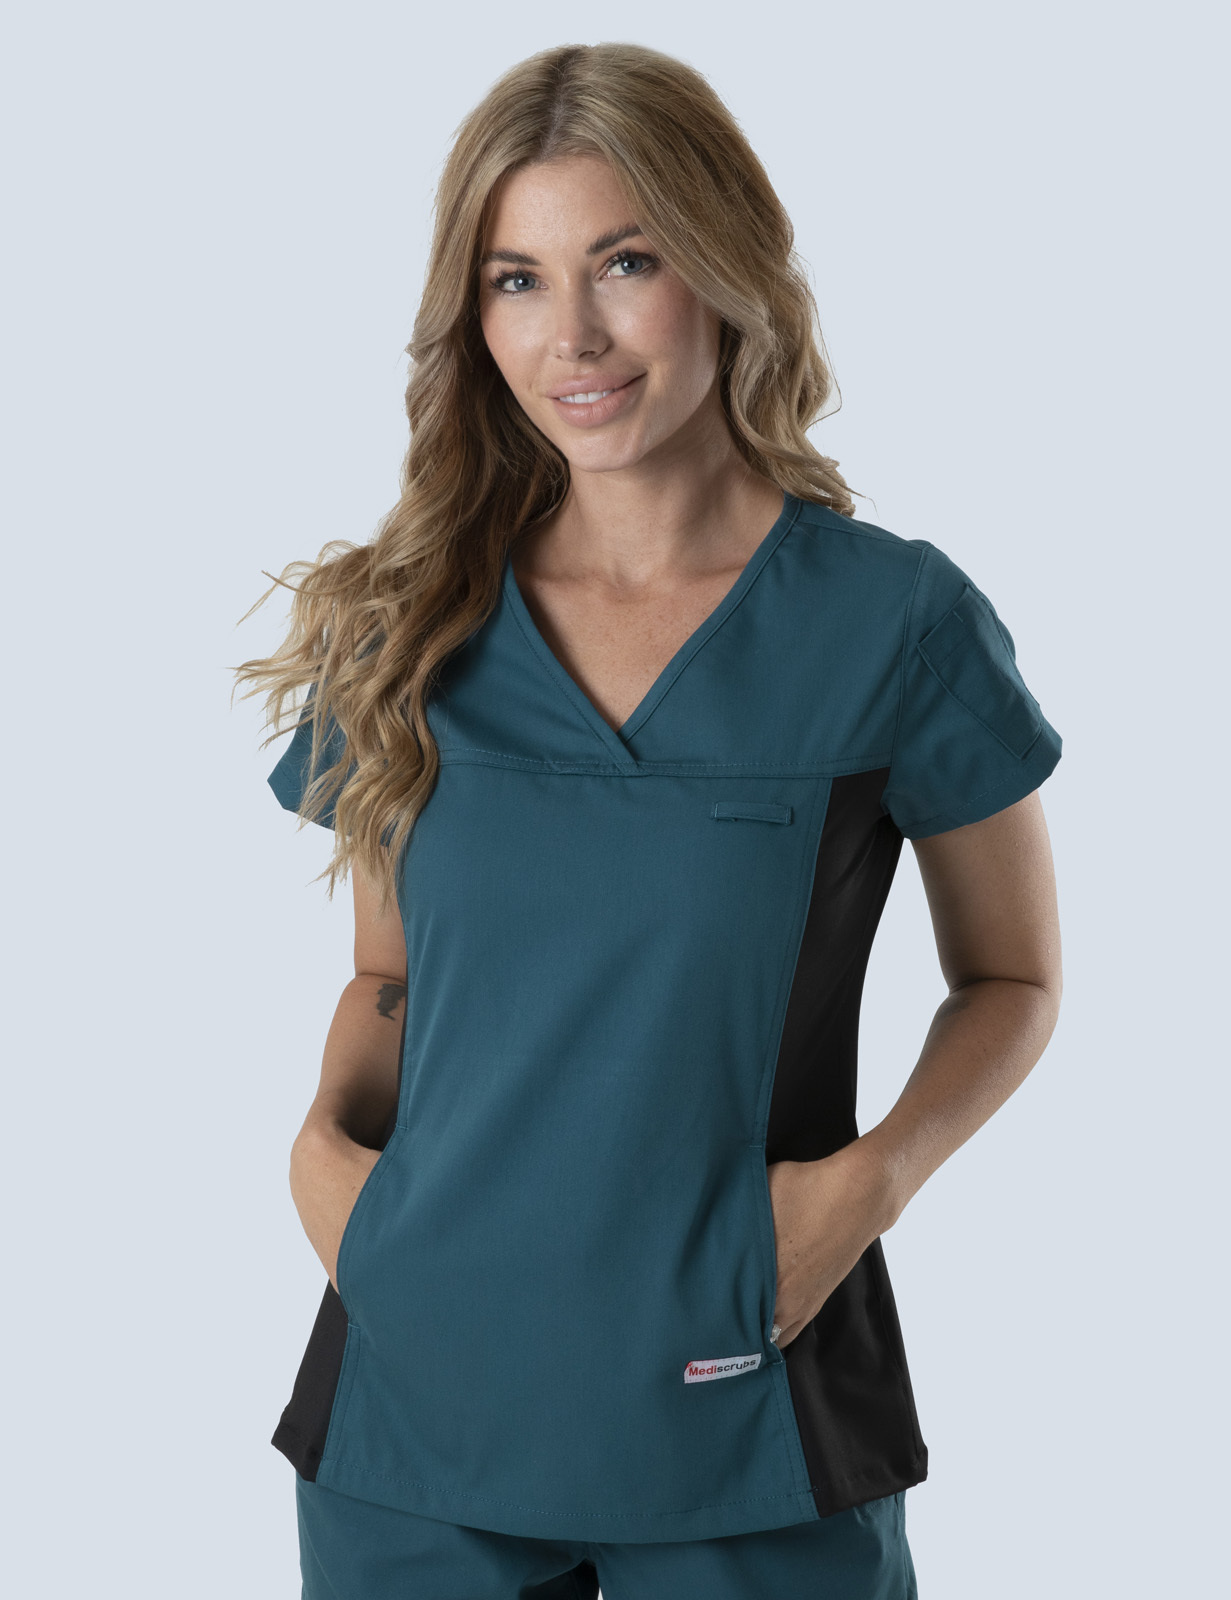 Gladstone Hospital - HDU (Women's Fit Spandex Scrub Top and Cargo Pants in Caribbean incl Logos)